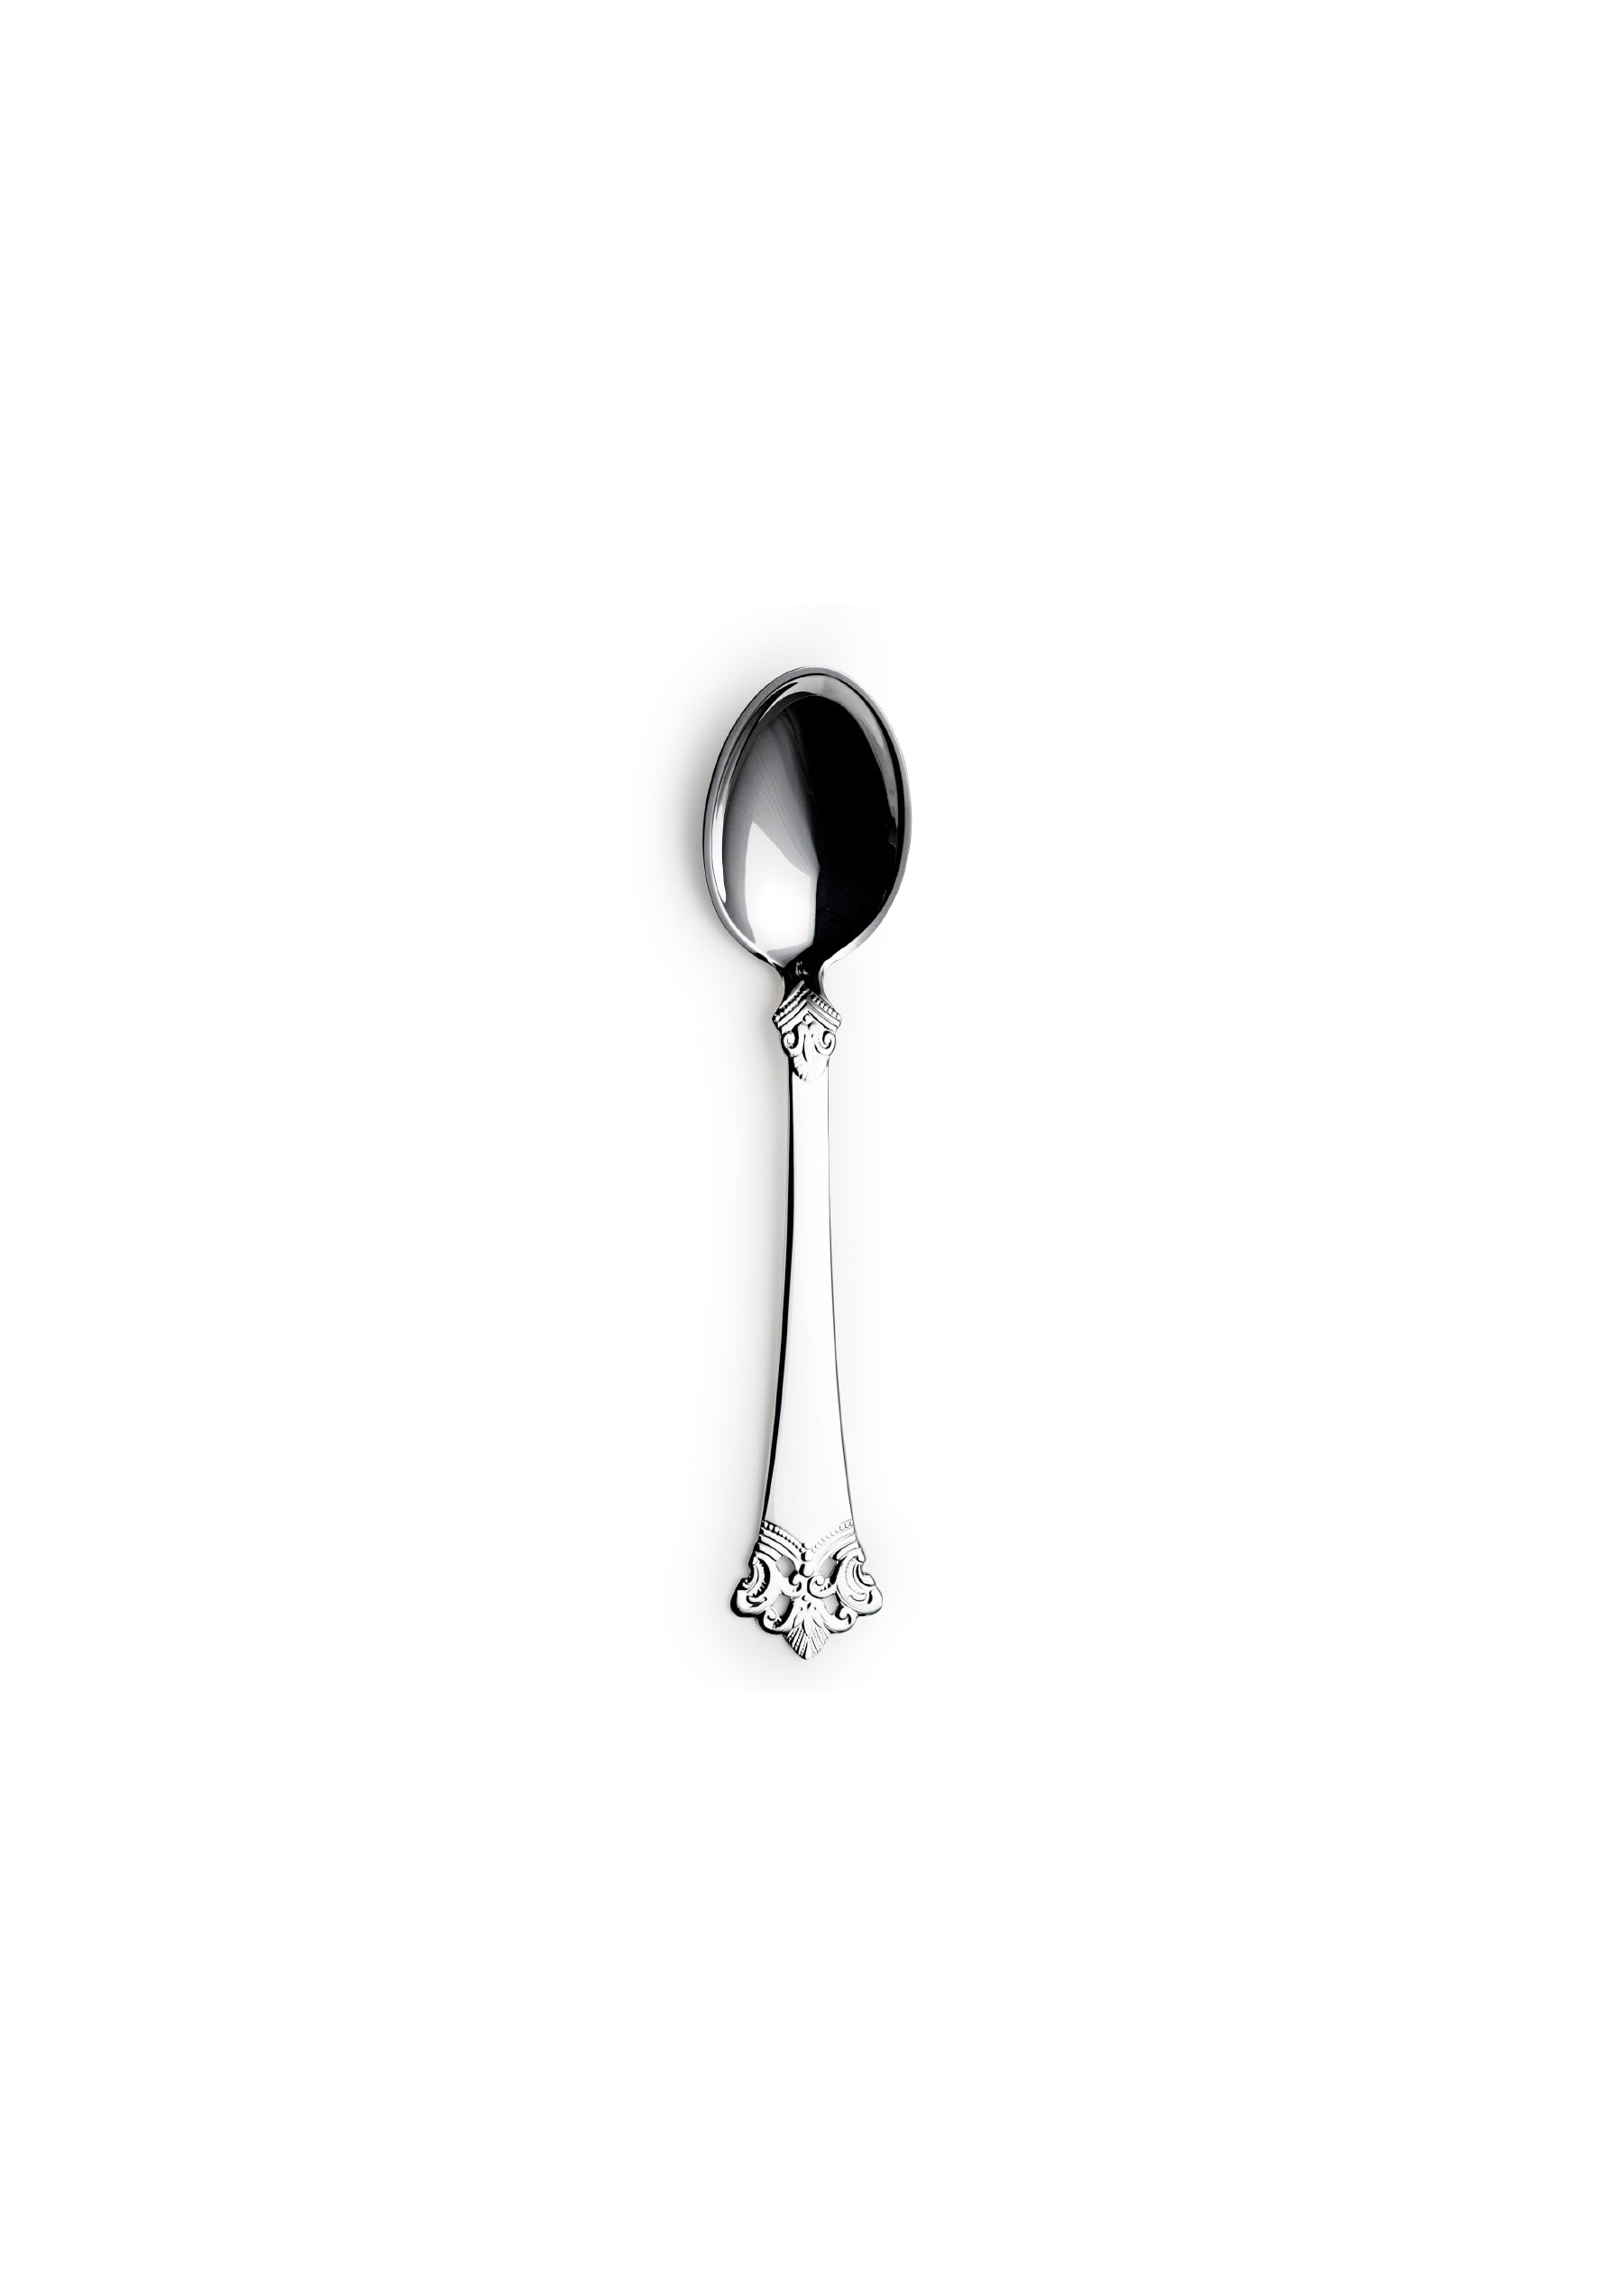 Anitra coffee spoon